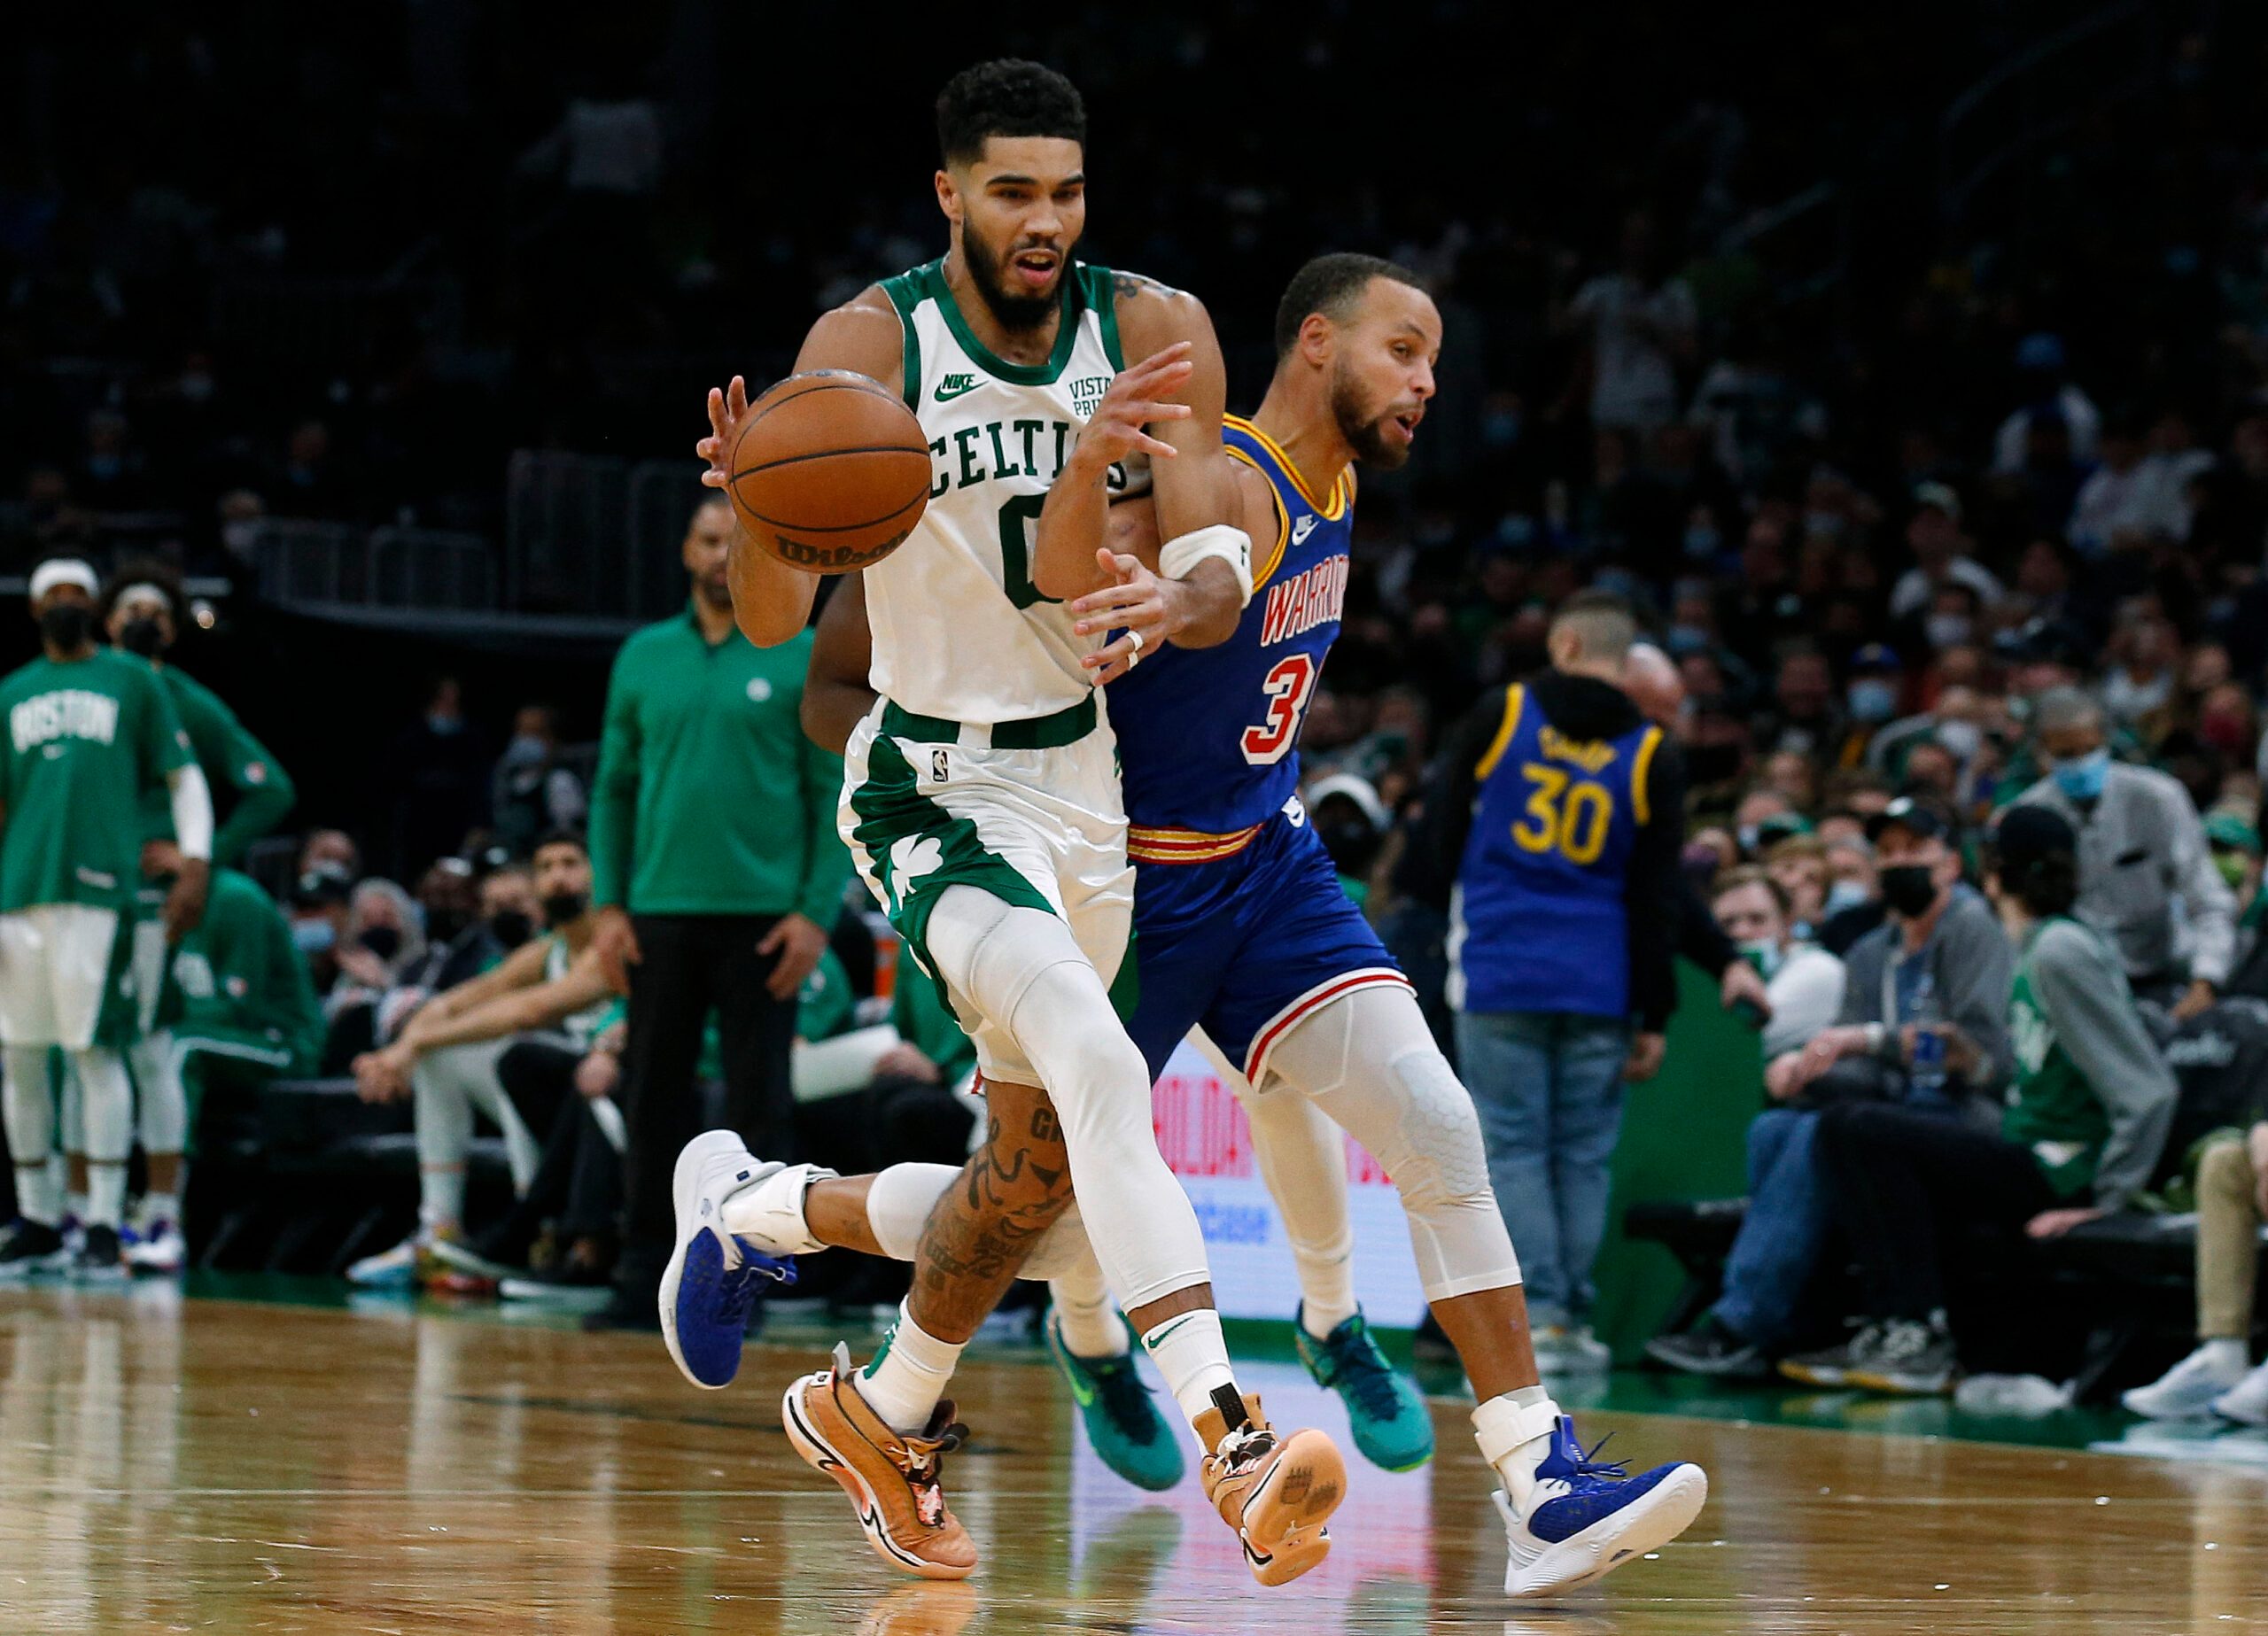 Lakers tie Celtics for NBA record 17th championship after closing